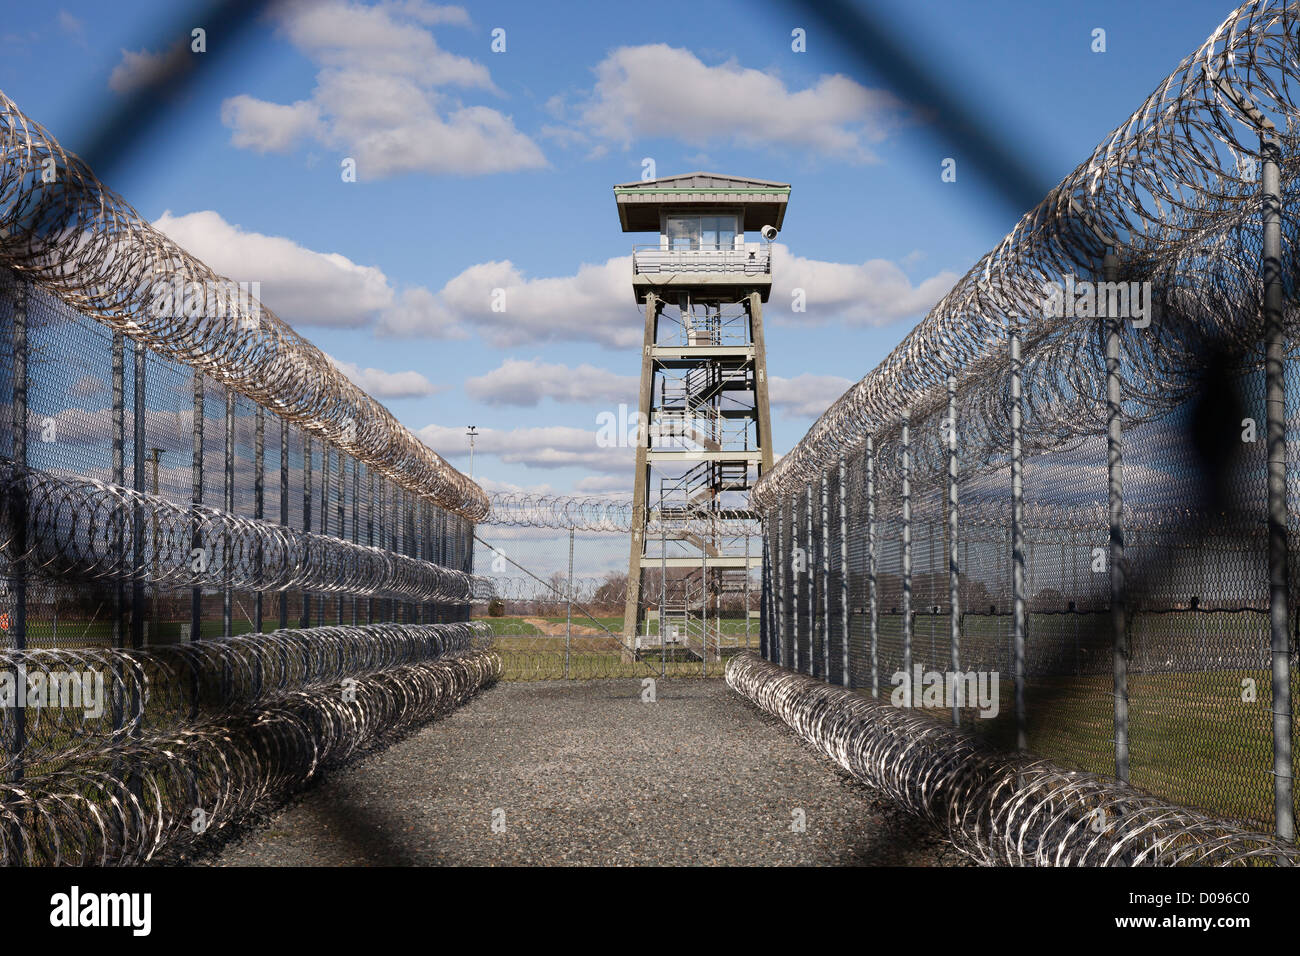 Prison fence, watch tower and barbed wire at Correctional Facility. High security. Stock Photo